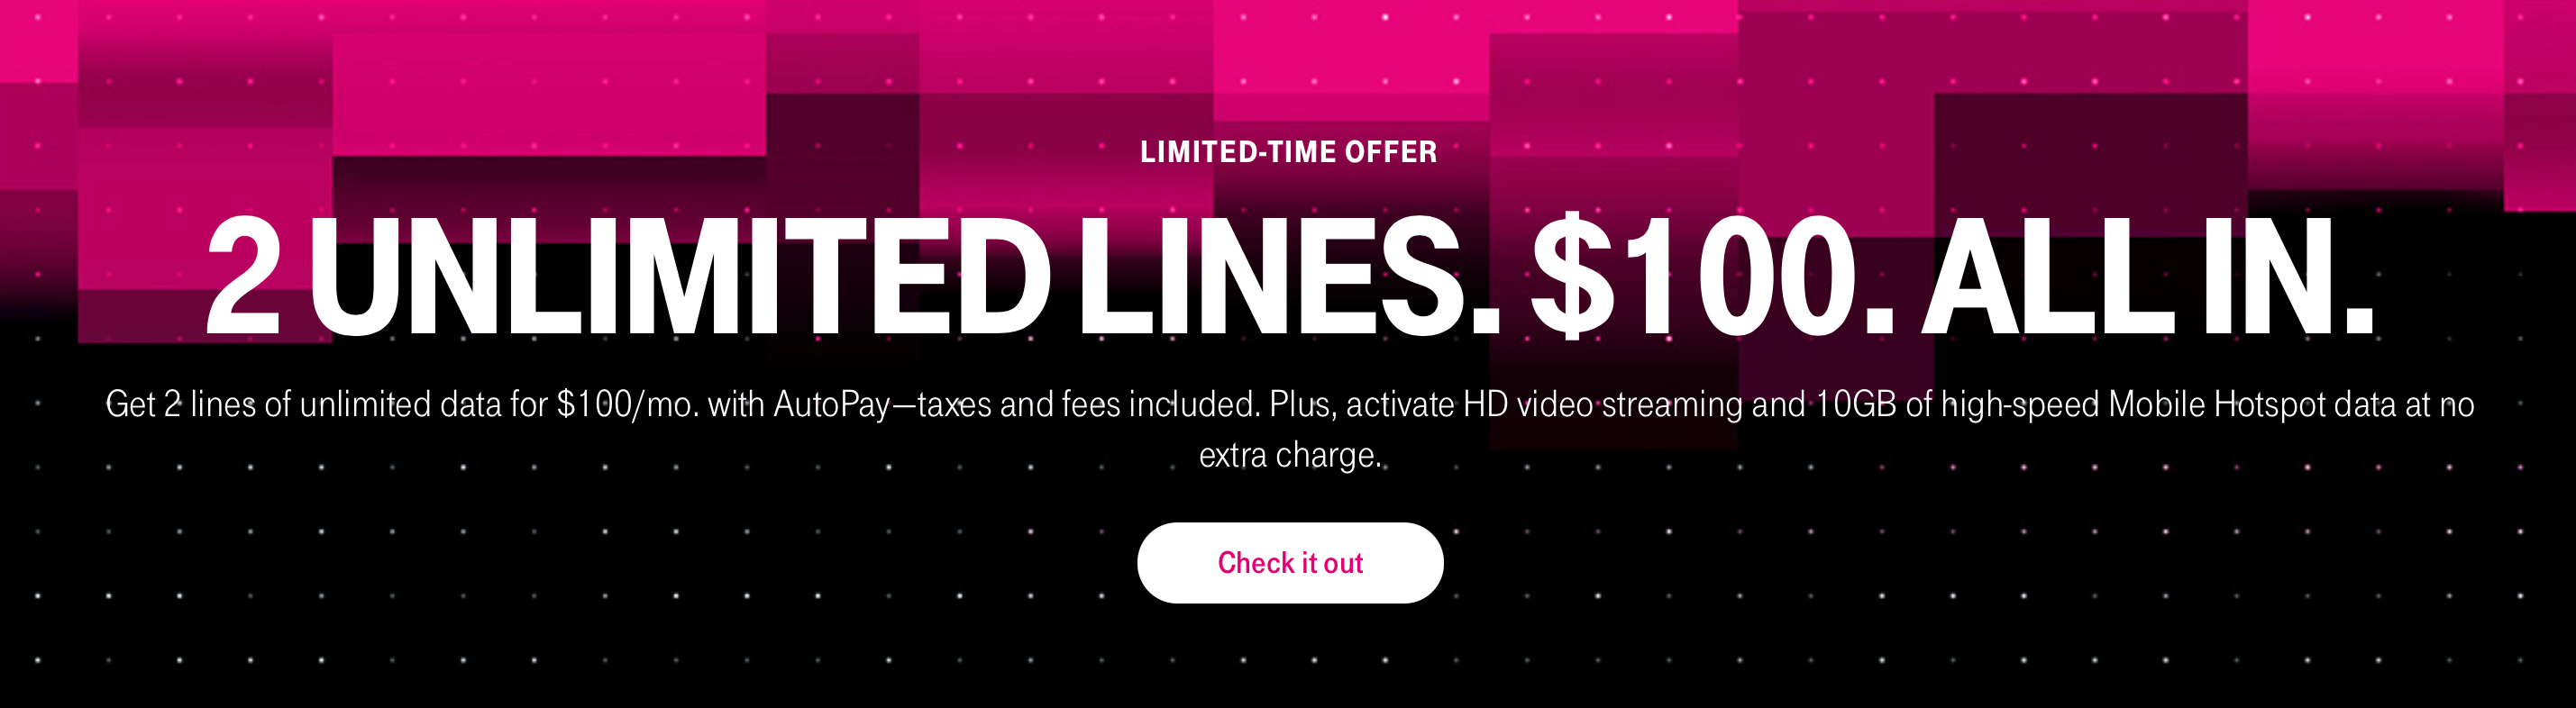 You can now get T-Mobile One with unlimited HD video streaming and 10GB of high-speed hotspot data